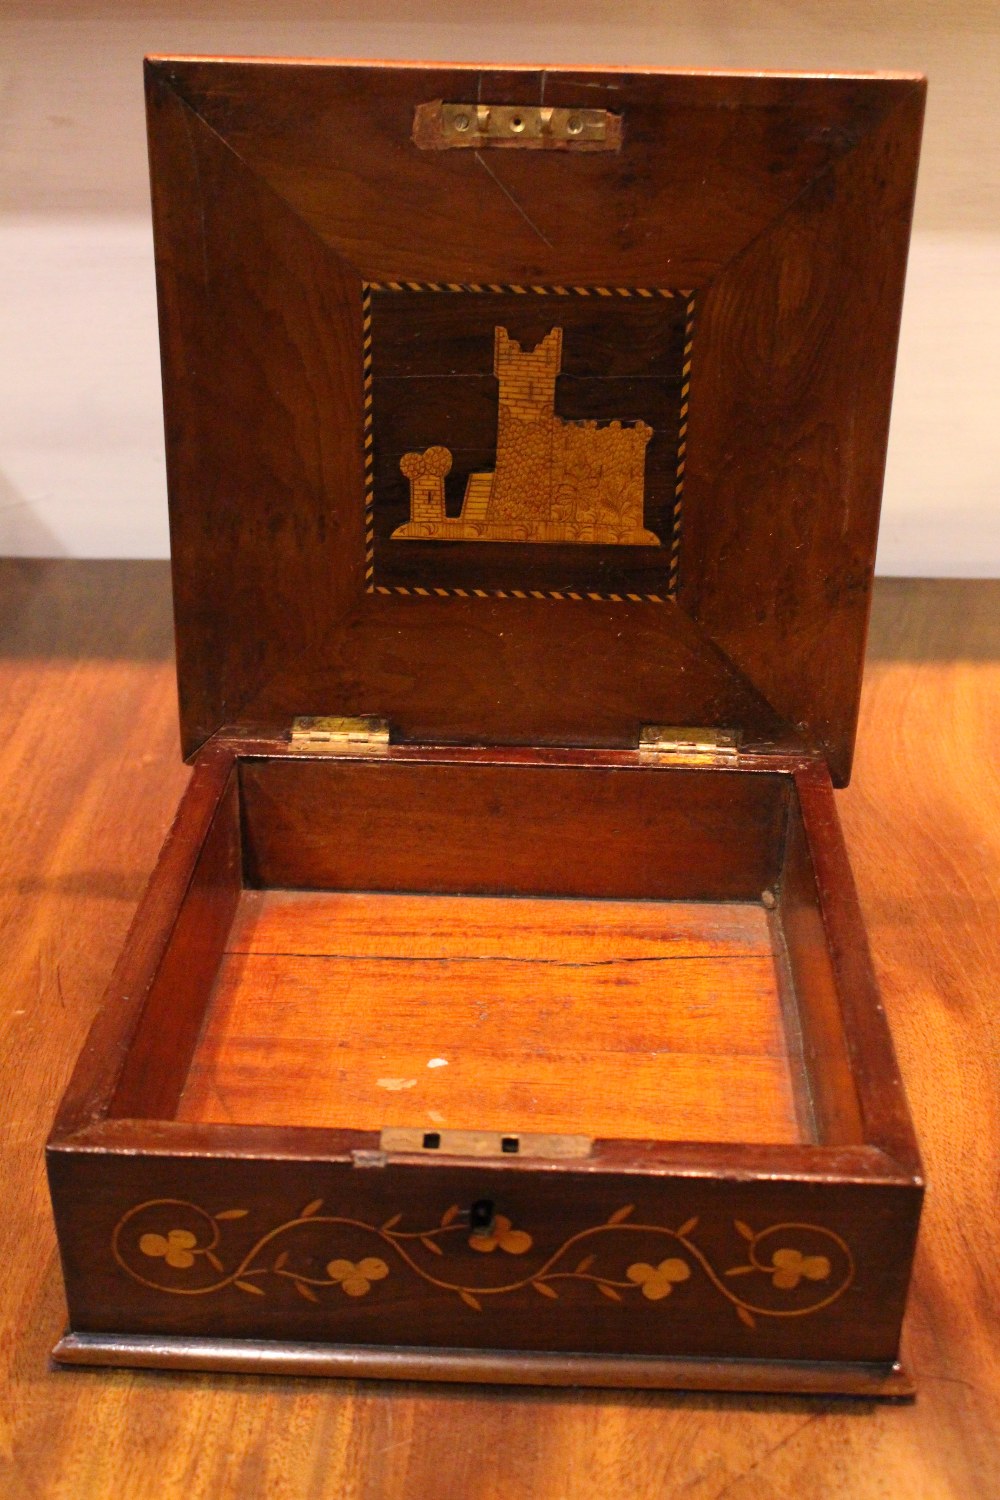 A VERY FINE 19TH CENTURY KILLARNEY-WARE BOX, with central inlaid motif of Muckross Abbey - Image 4 of 4